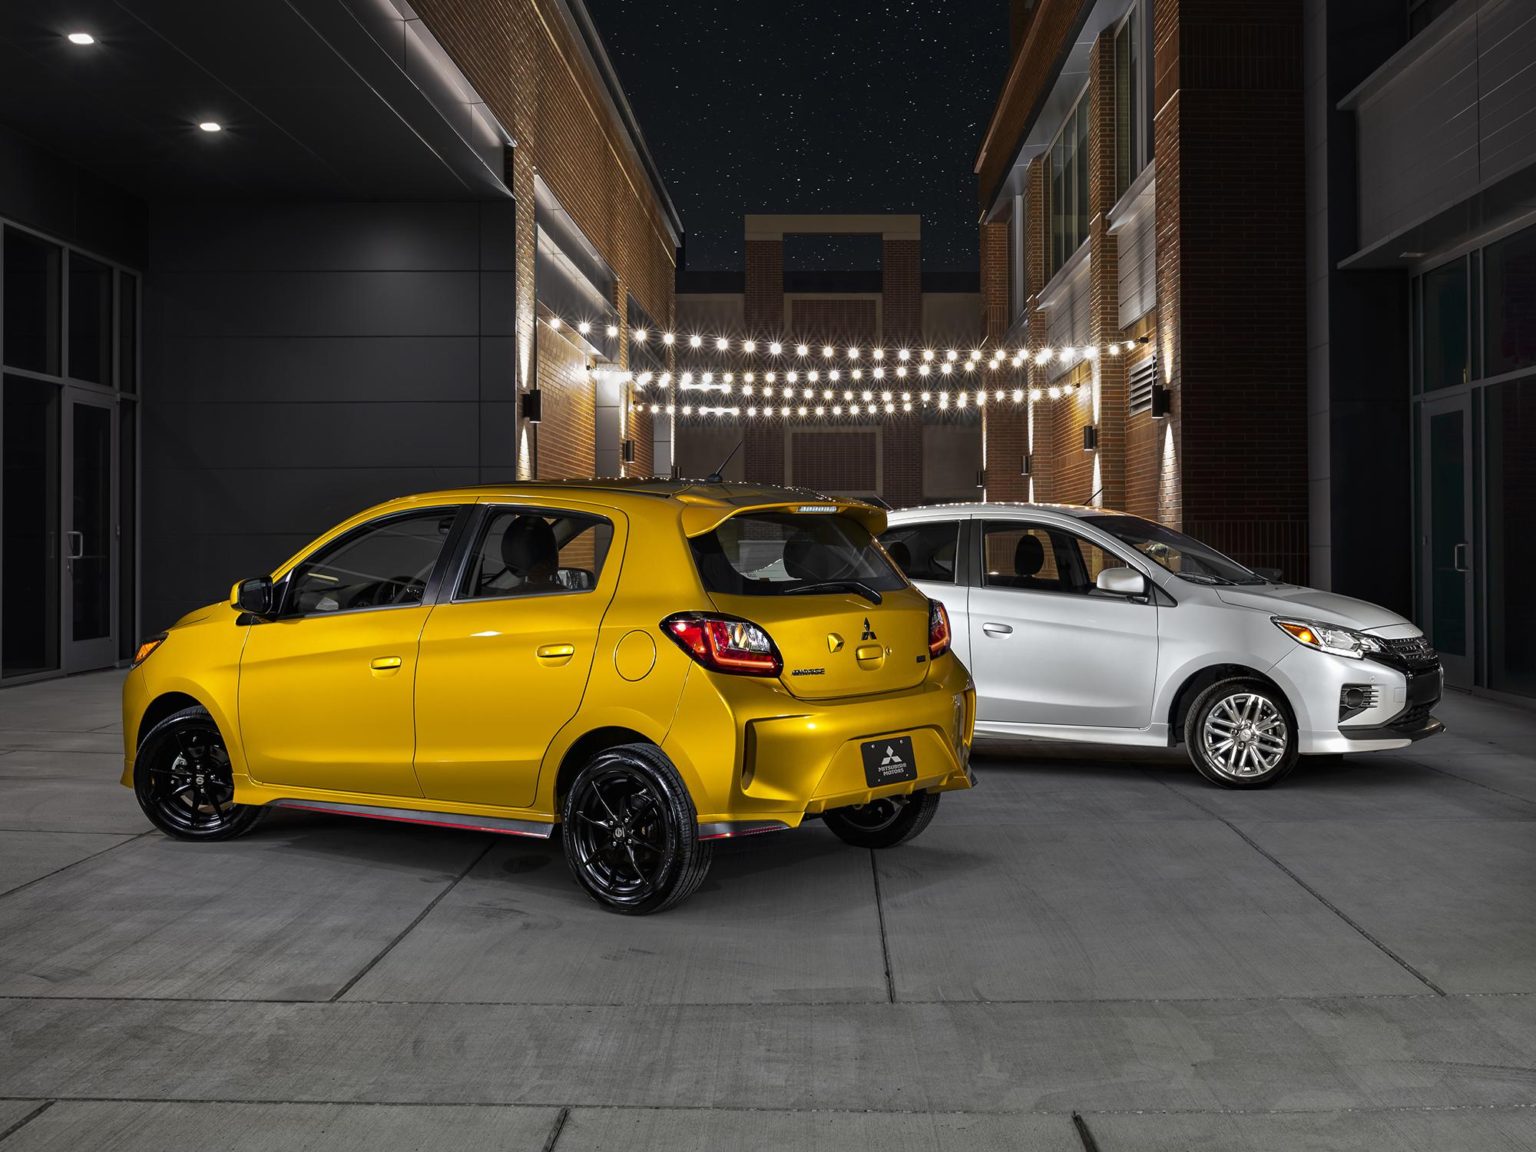 The 2021 Mitsubishi Mirage is one of the least expensive cars you can buy.